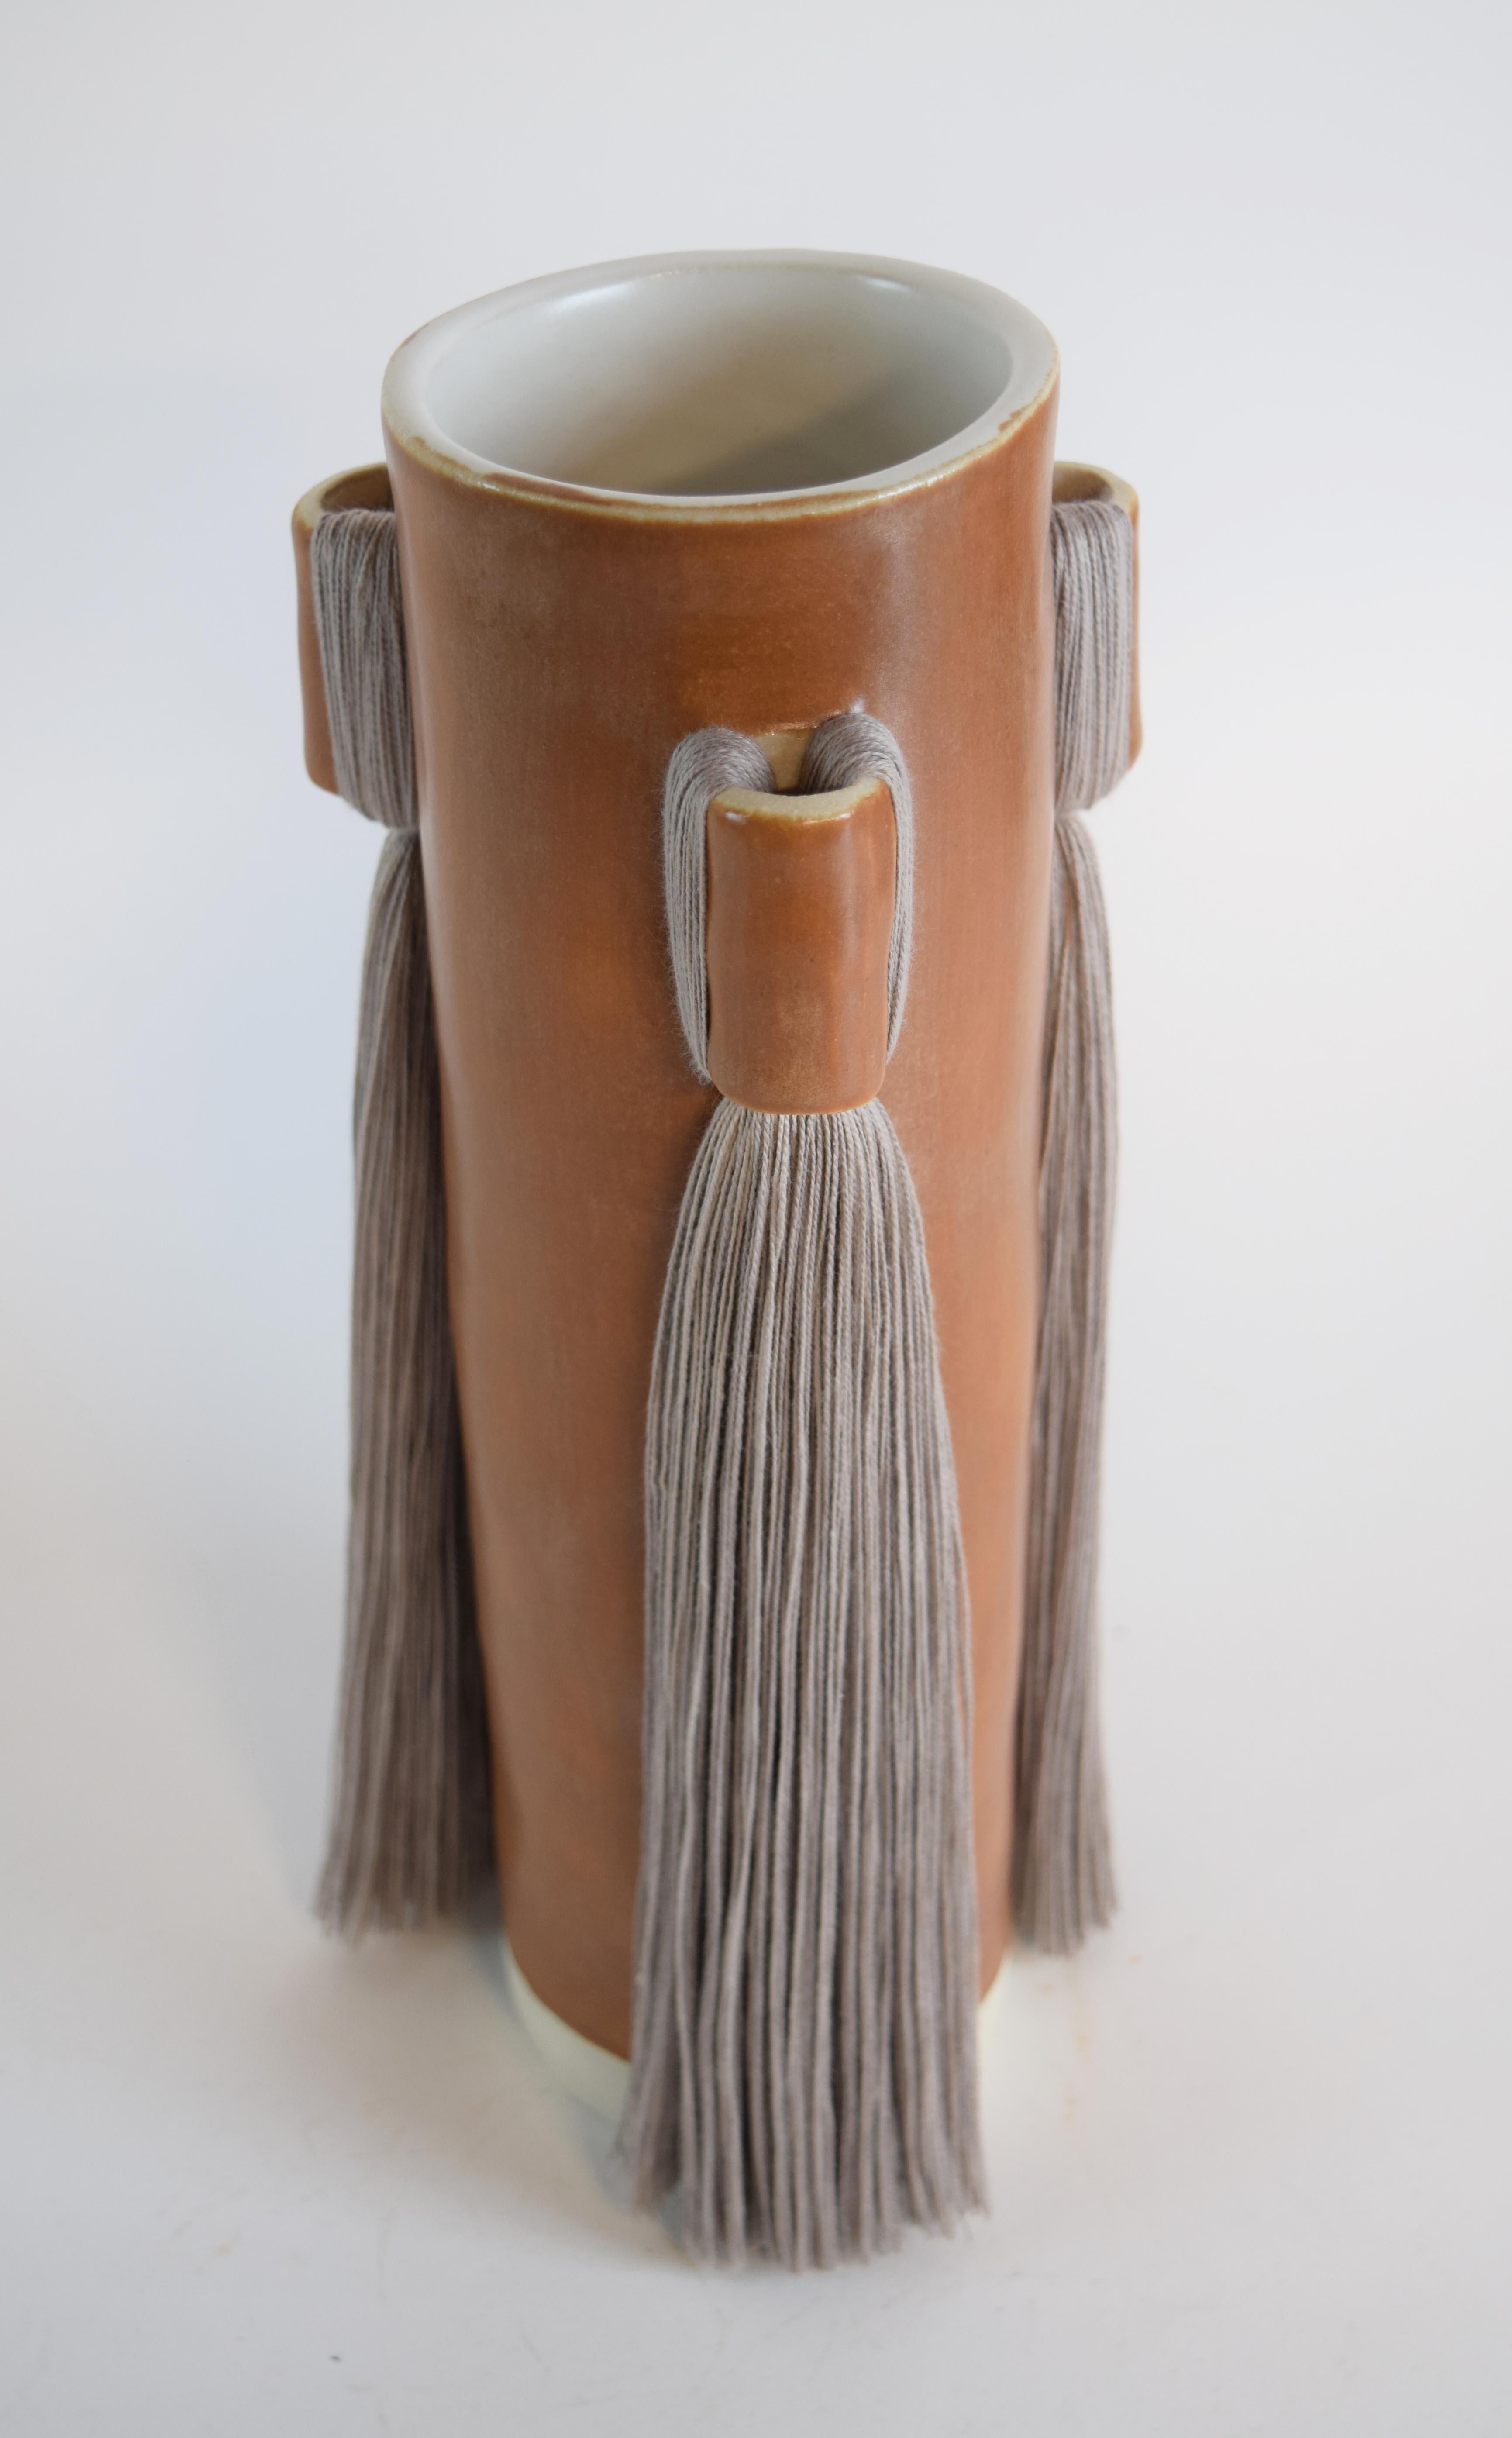 Vase #607 by Karen Gayle Tinney

Lengths of fringe adorn 3 sides of this vase which is sized generously to hold a large arrangement of flowers.

Hand formed stoneware with satin brown glaze. Light gray cotton fringe detail. Inside is glazed white,